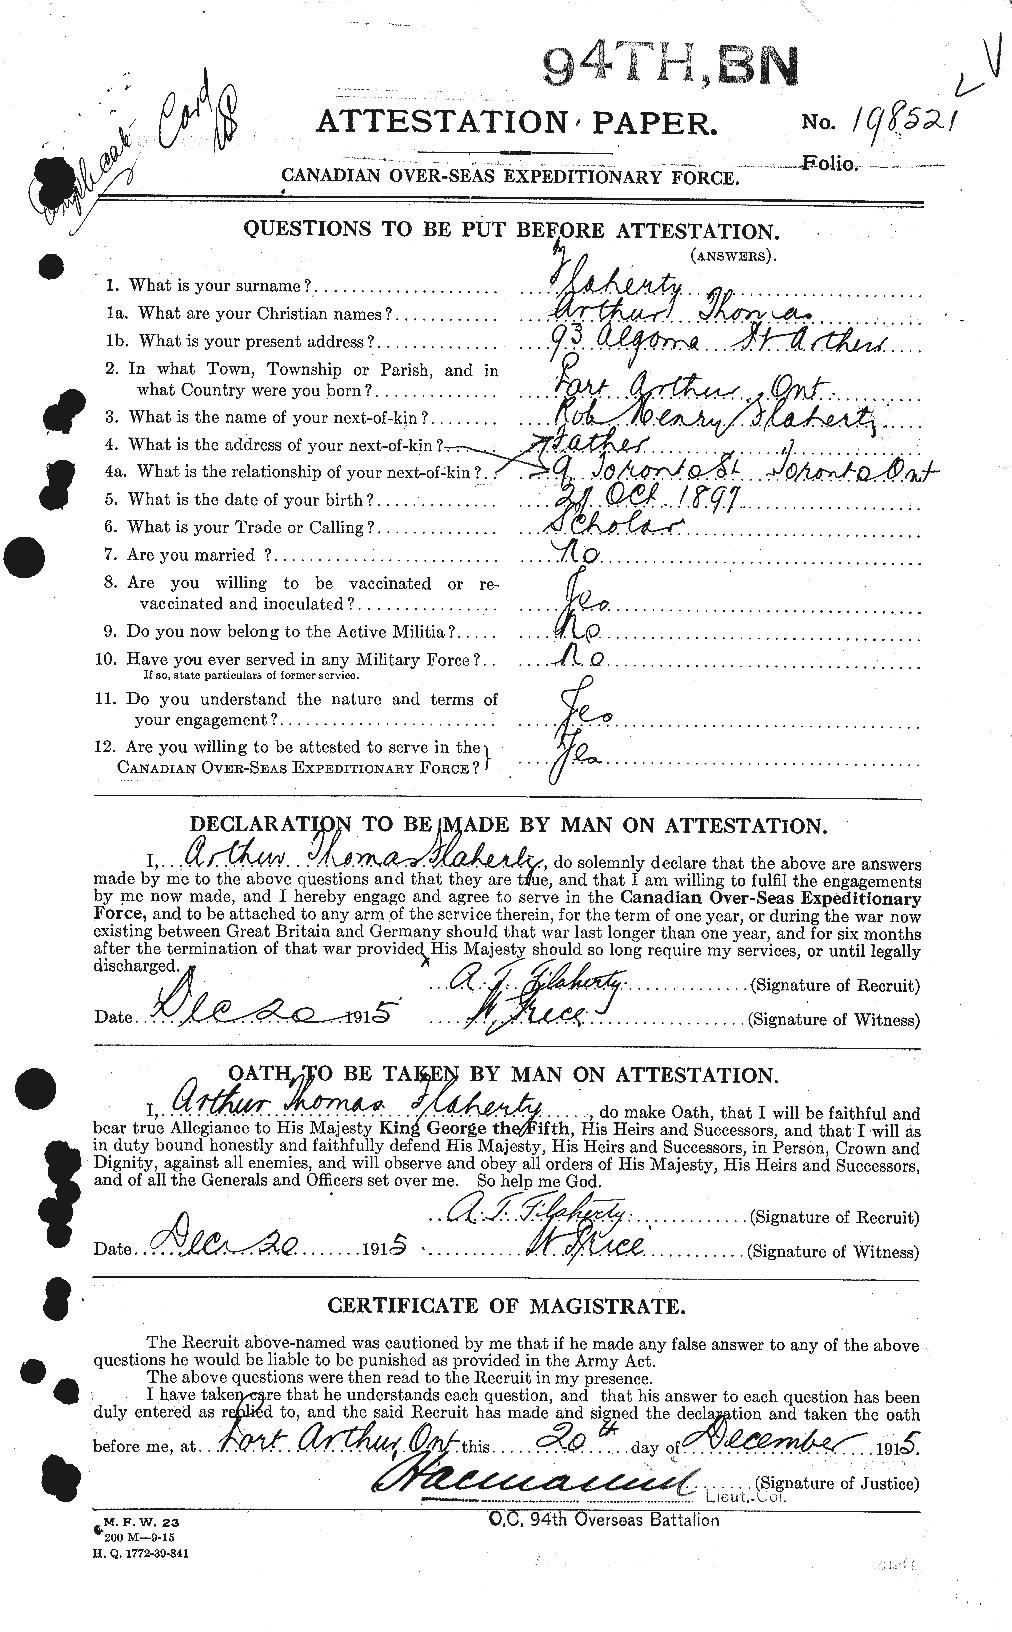 Personnel Records of the First World War - CEF 323344a